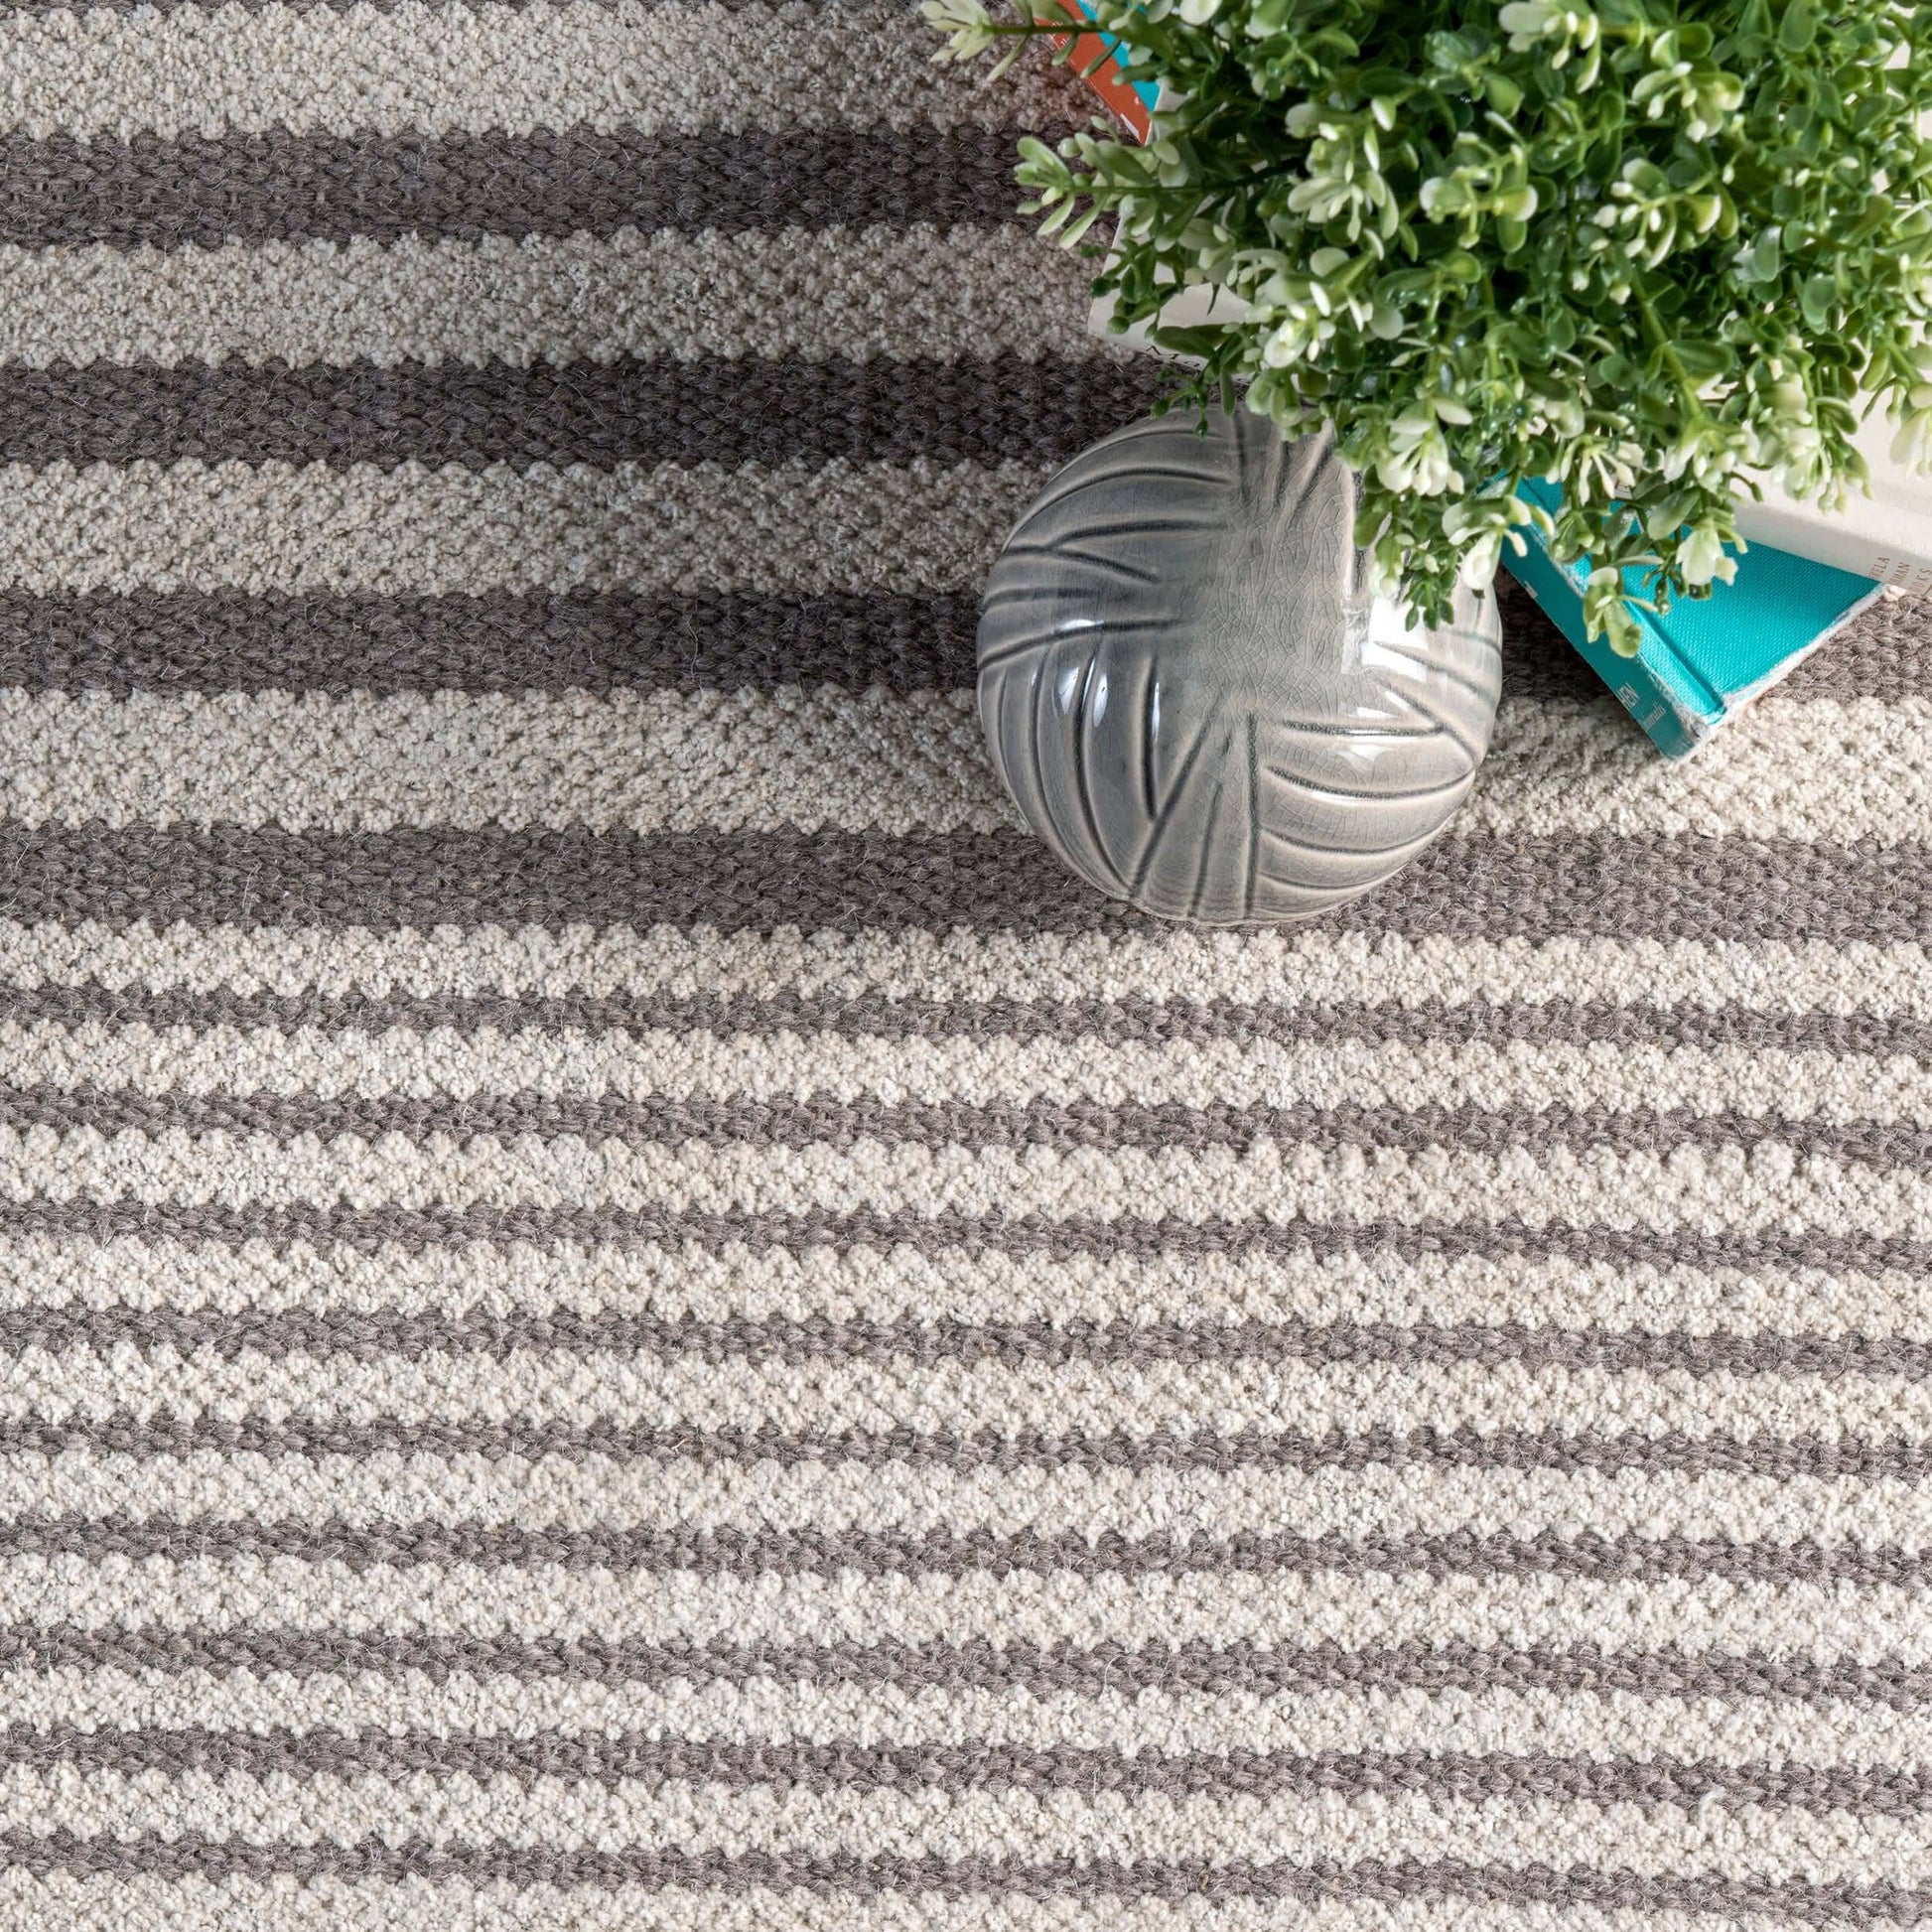 Gray Stripe Cotton Rug with Tassels